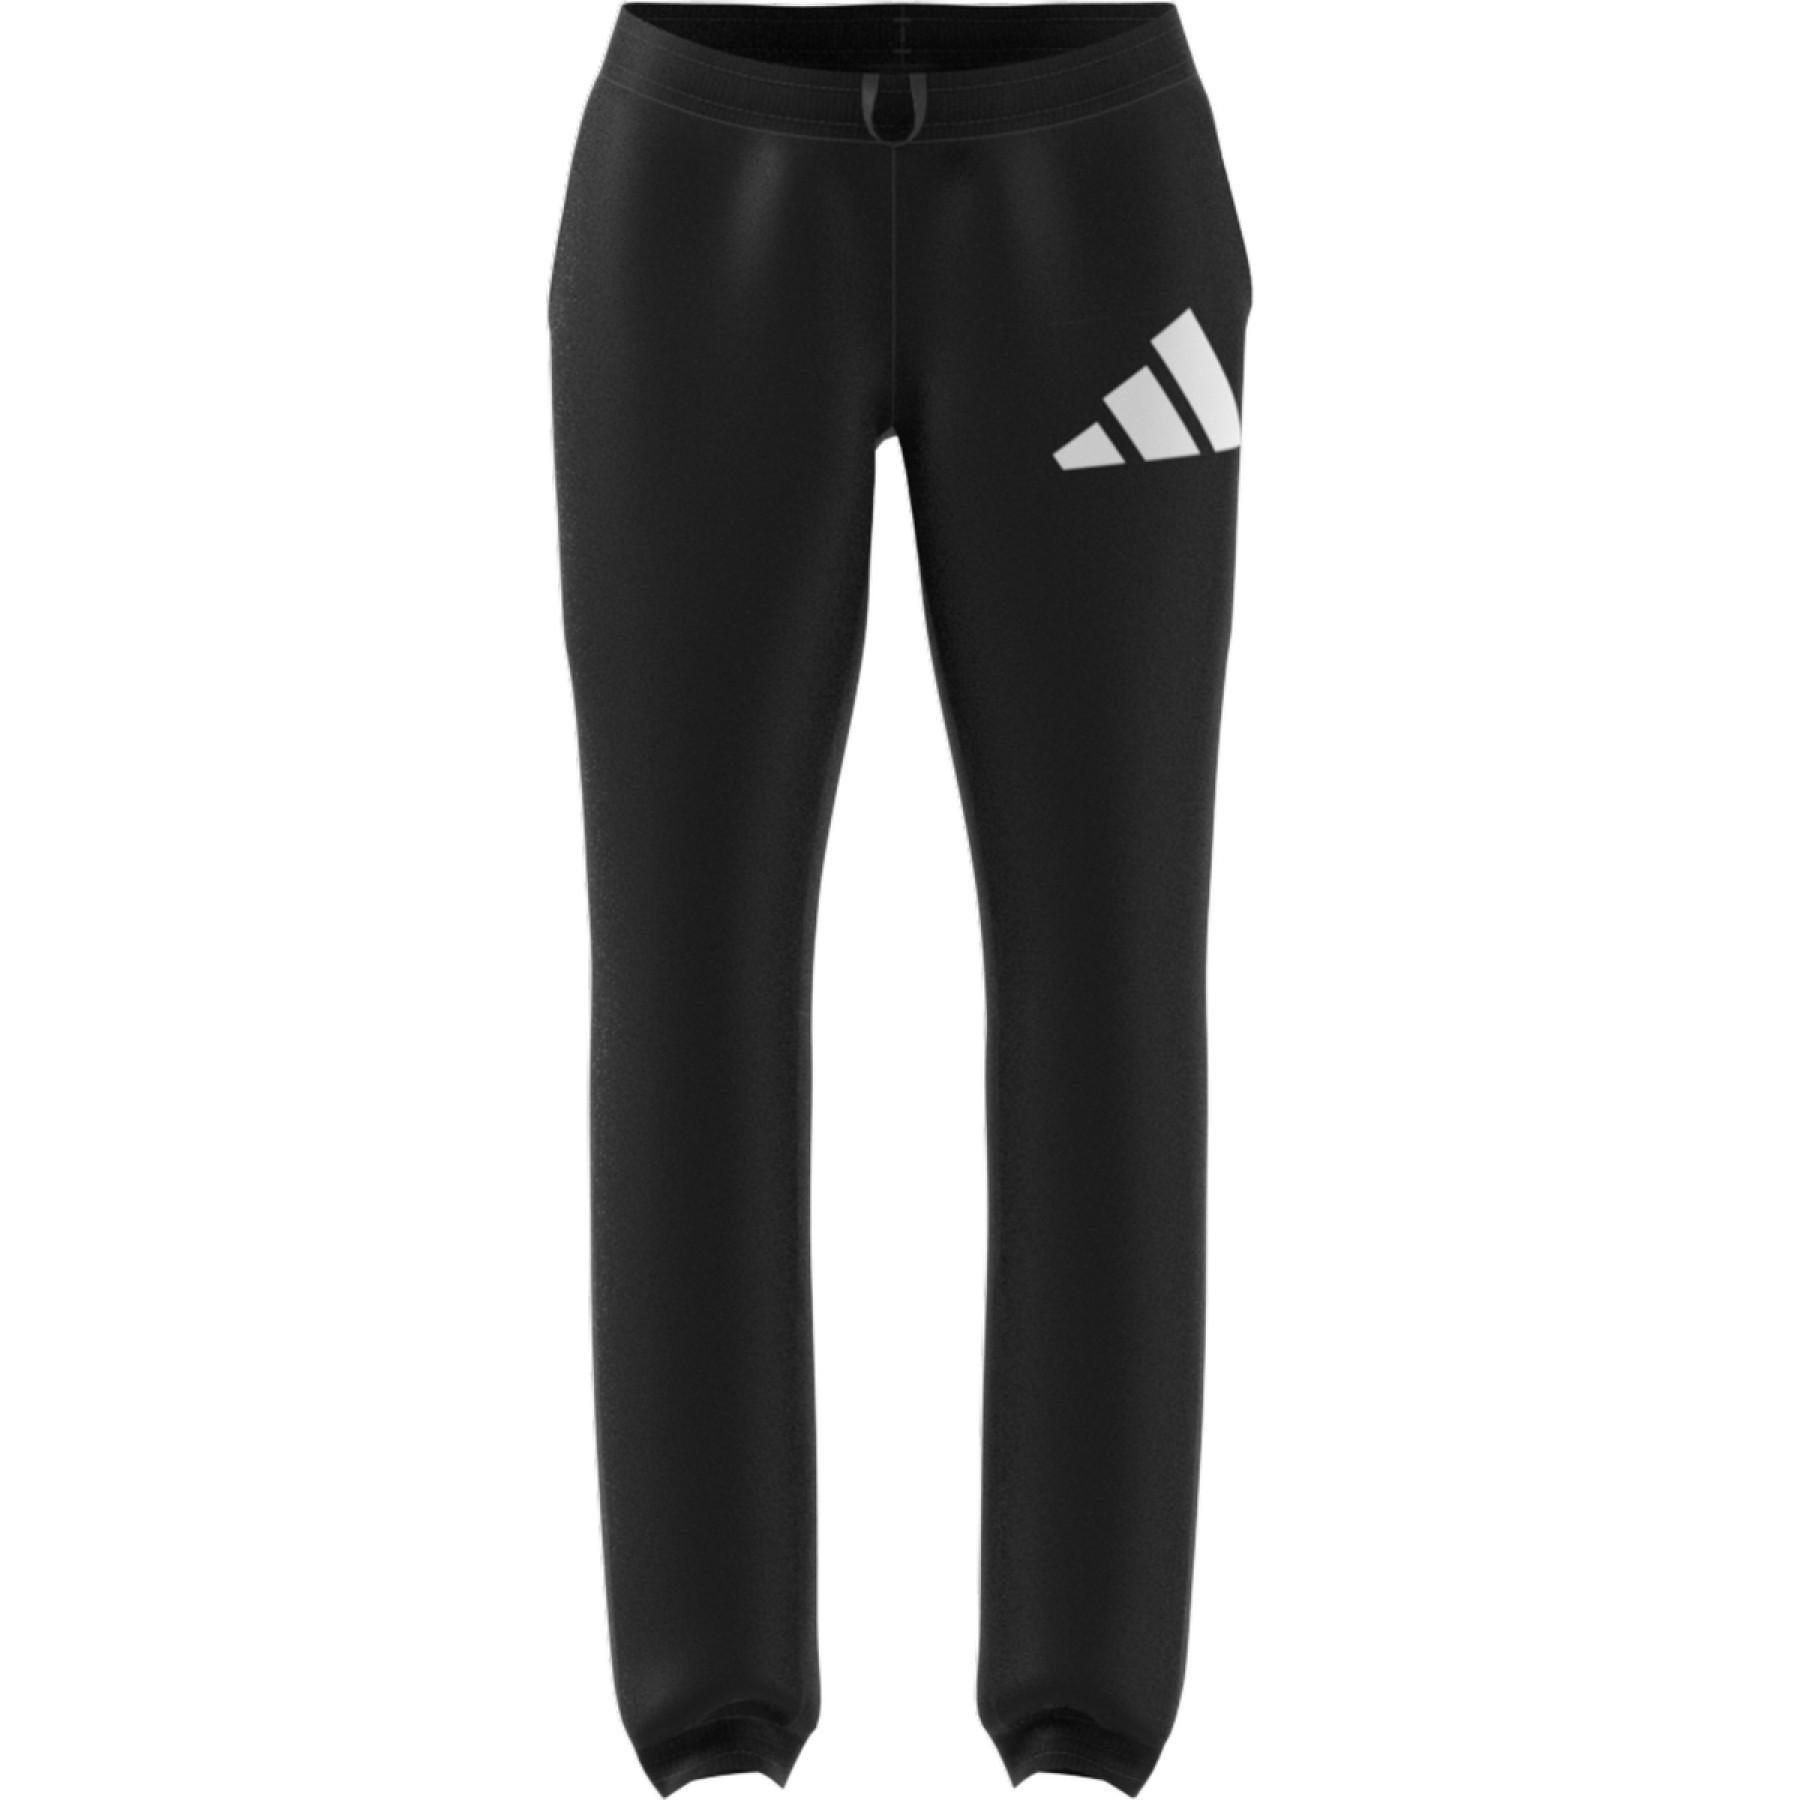 Women's trousers adidas Woven Badge of Sport